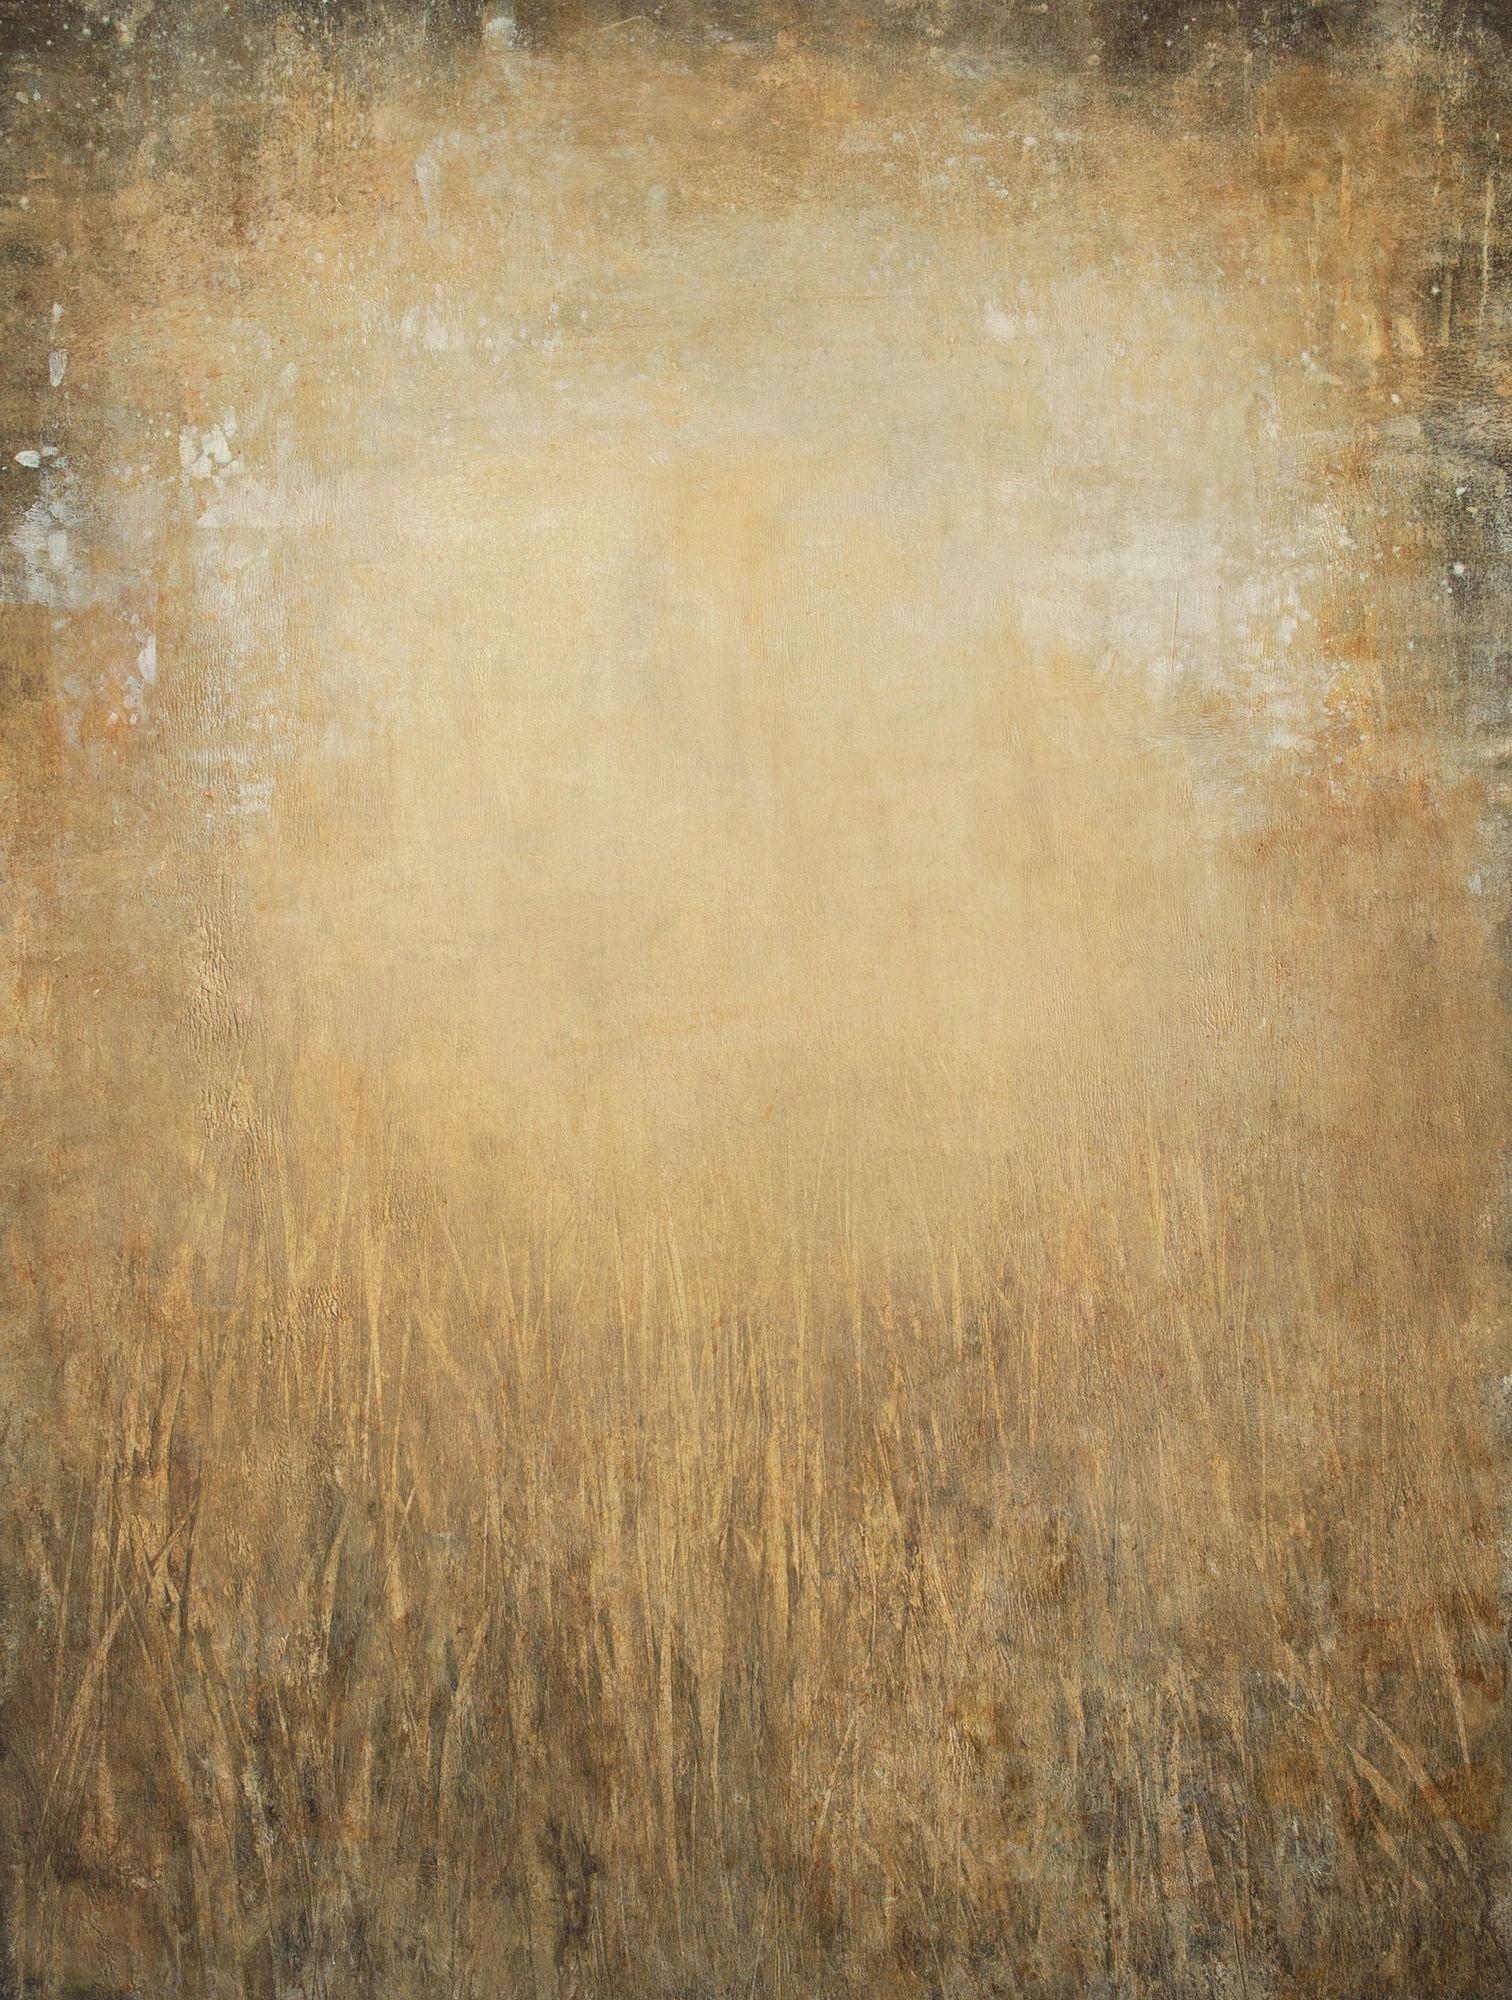 Don Bishop Abstract Painting - Golden Light 230502, Painting, Acrylic on Canvas